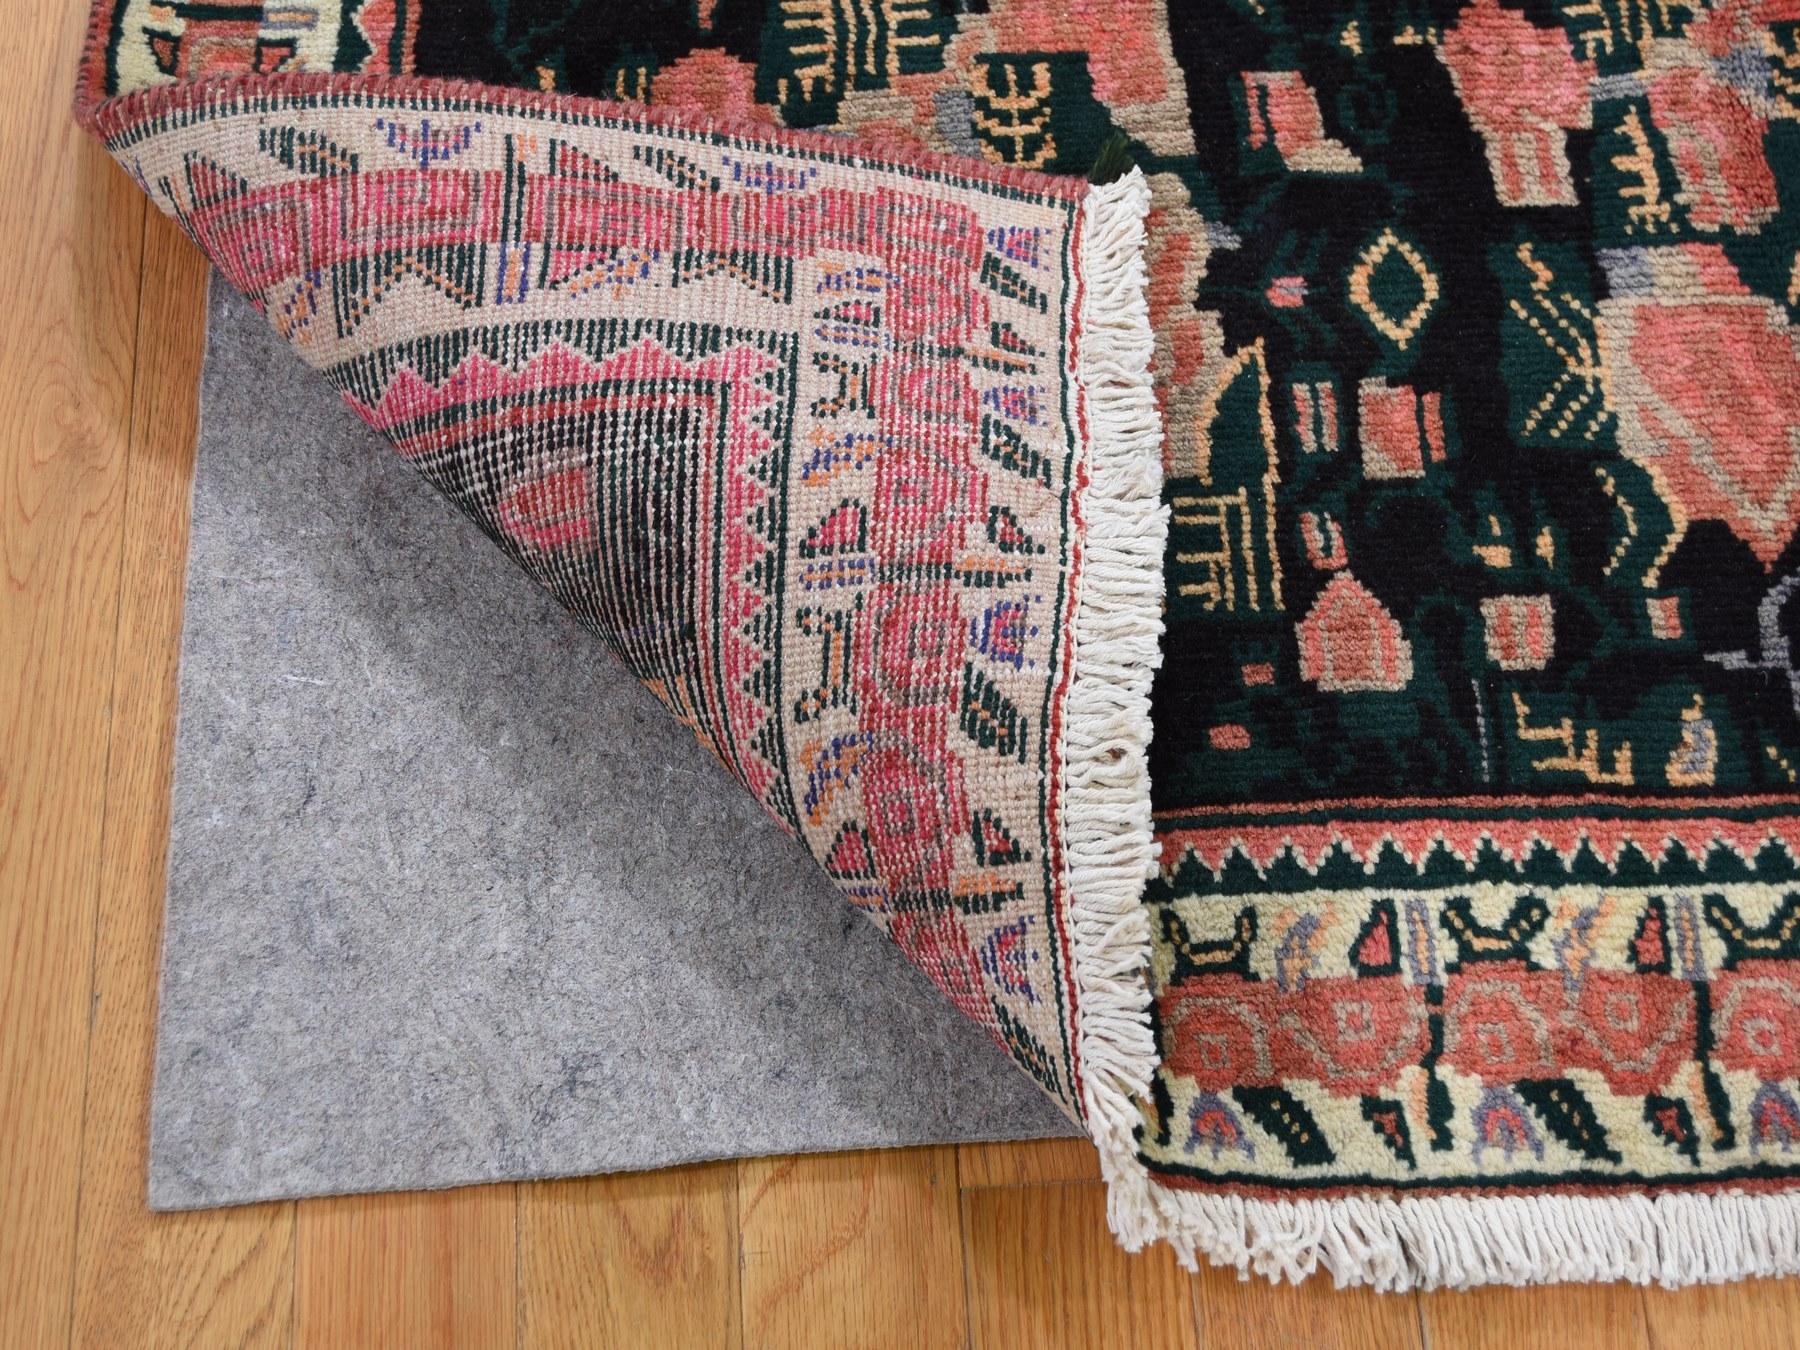 This fabulous hand knotted carpet has been created and designed for extra strength and durability. This rug has been handcrafted for weeks in the traditional method that is used to make rugs. This is truly a one-of-kind piece.

Exact rug size in